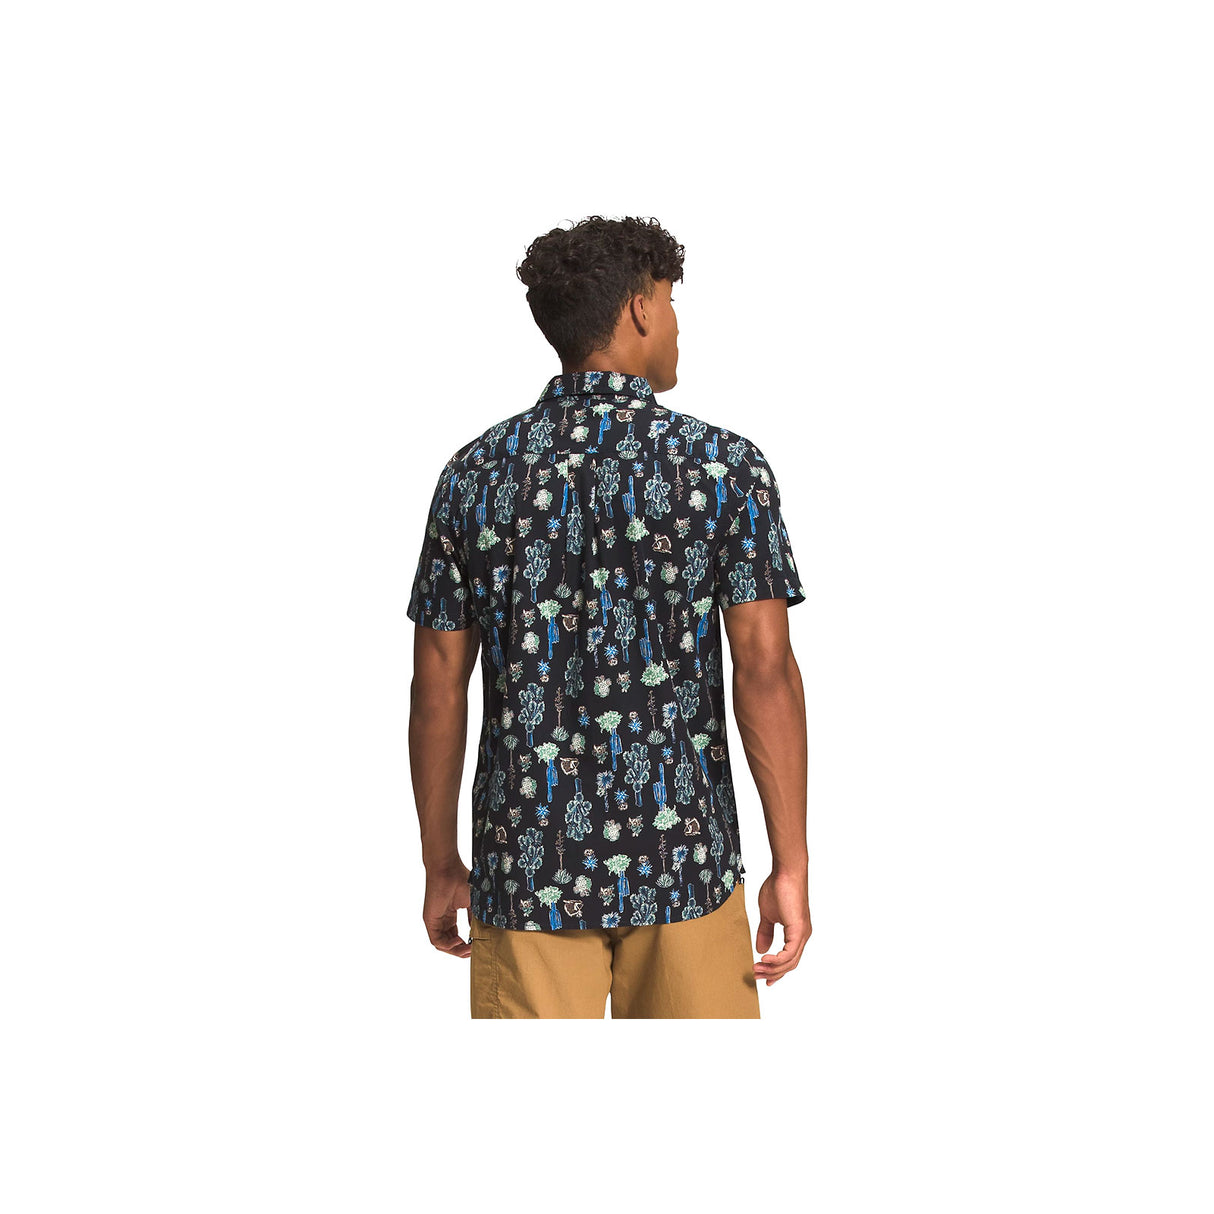 The North Face Baytrail Pattern Short Sleeve Shirt (Men) - Super Sonic Blue Cactus Study Print Apparel - Top - Short Sleeve - The Heel Shoe Fitters